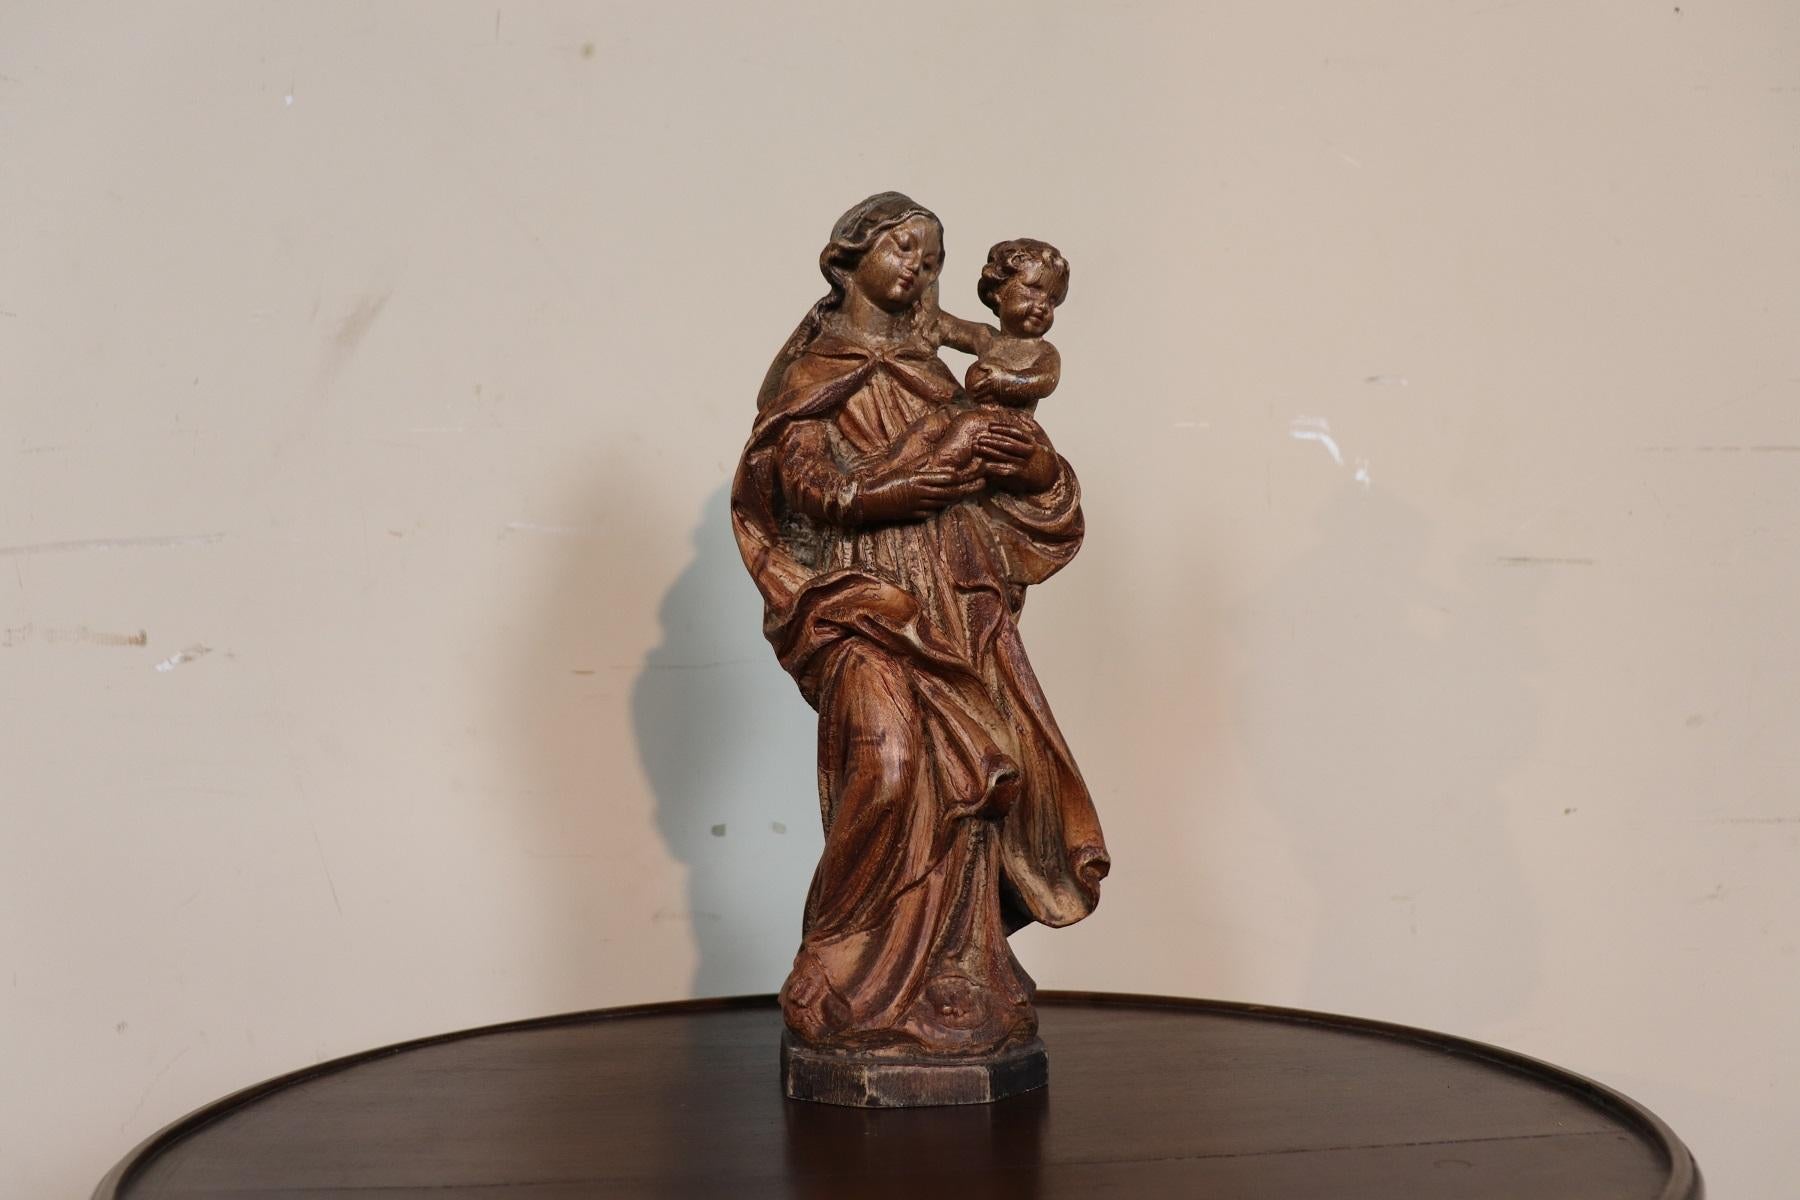 Refined sculpture in wood carved. Refined and delicate figure of Madonna with Child. Sculpture work of great delicacy we ask you to look at the sweetness of the faces. Work expresses high skill. Wood carving work of great quality looking at the